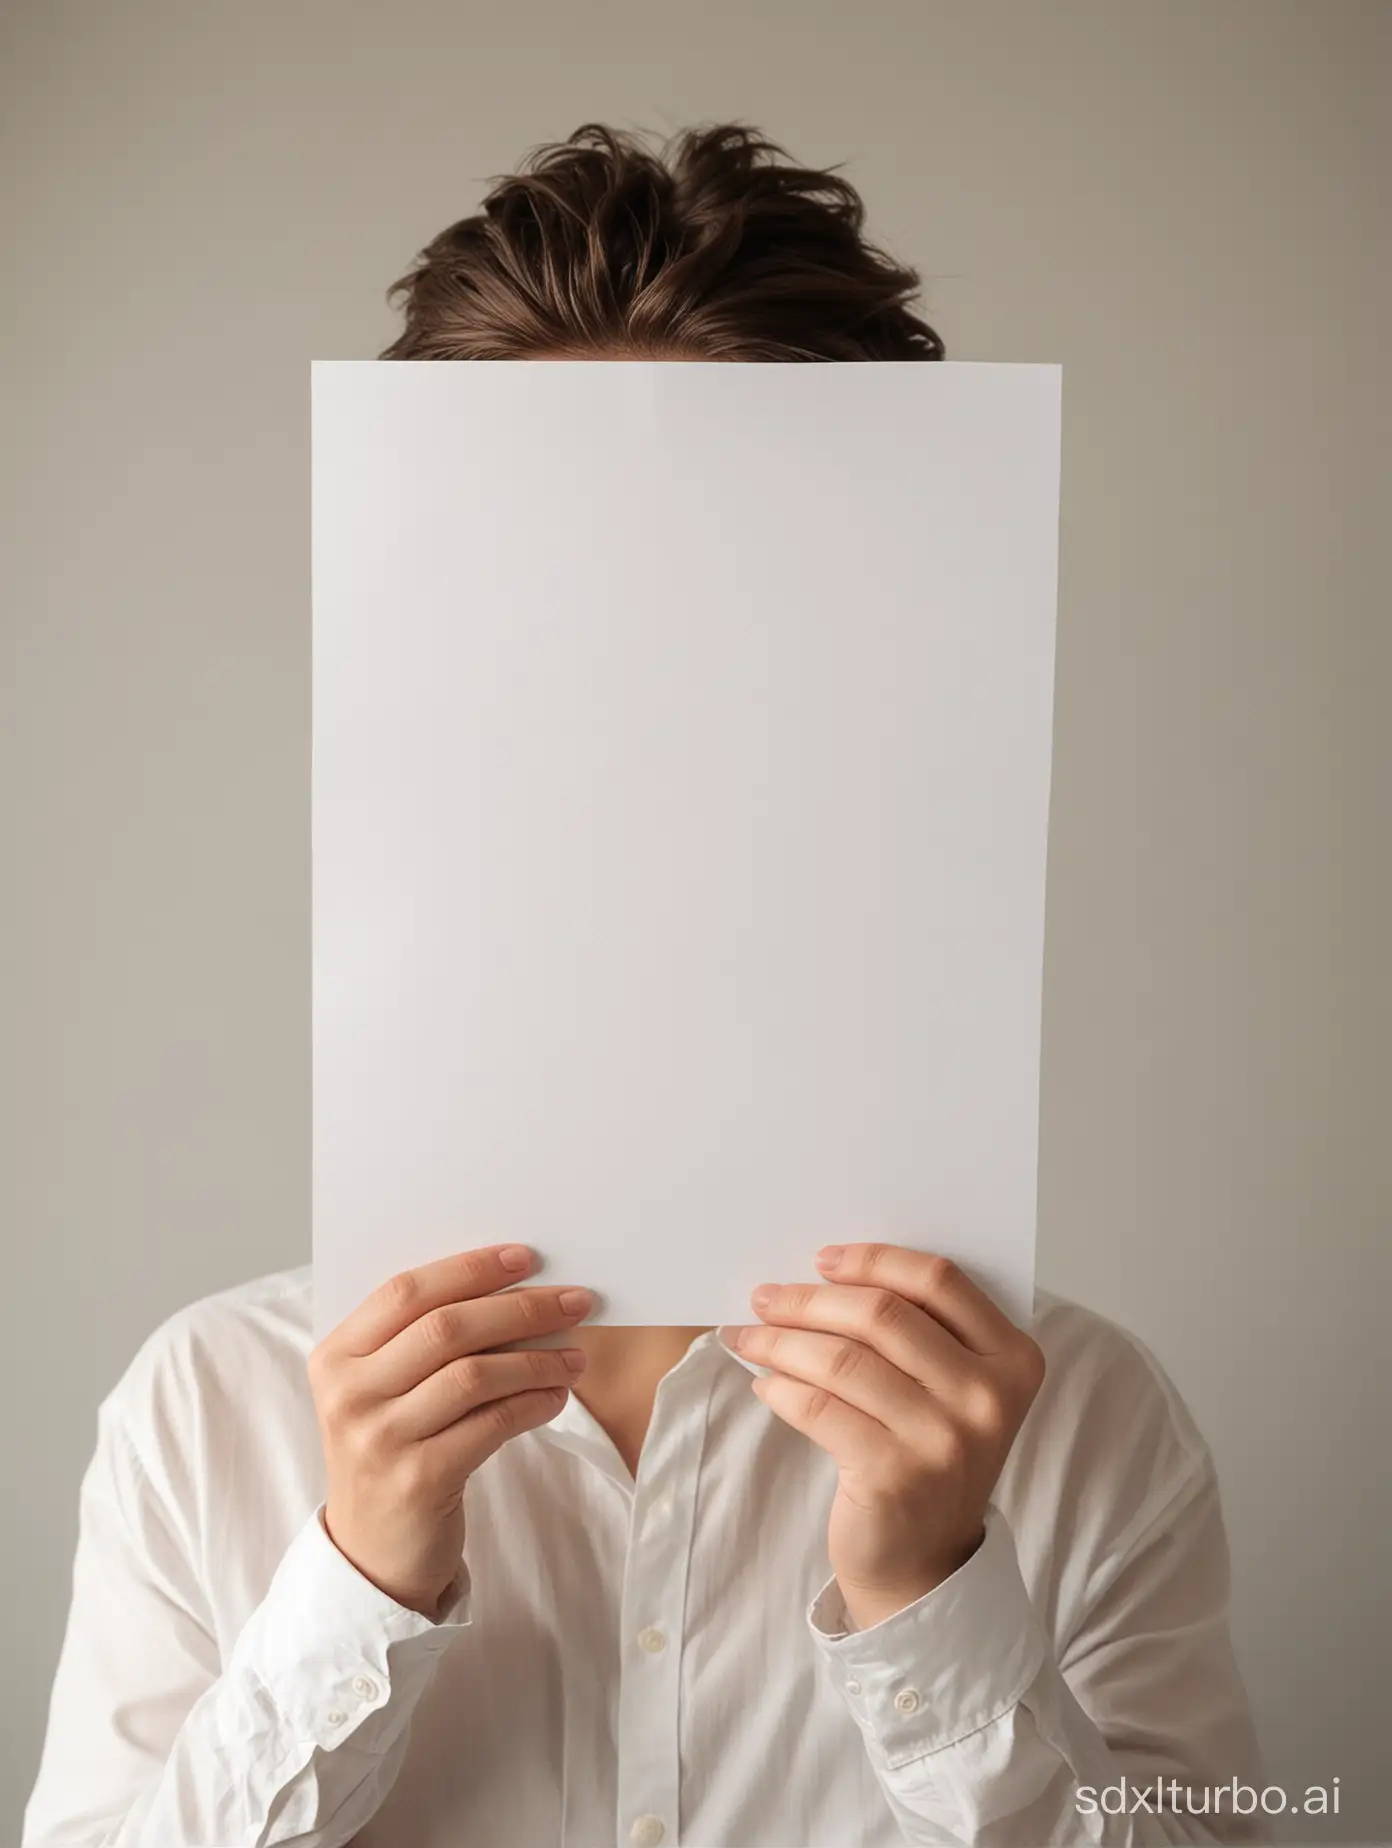 person holding a blank a4 paper infront of its head to cover the face.  soft morning light.